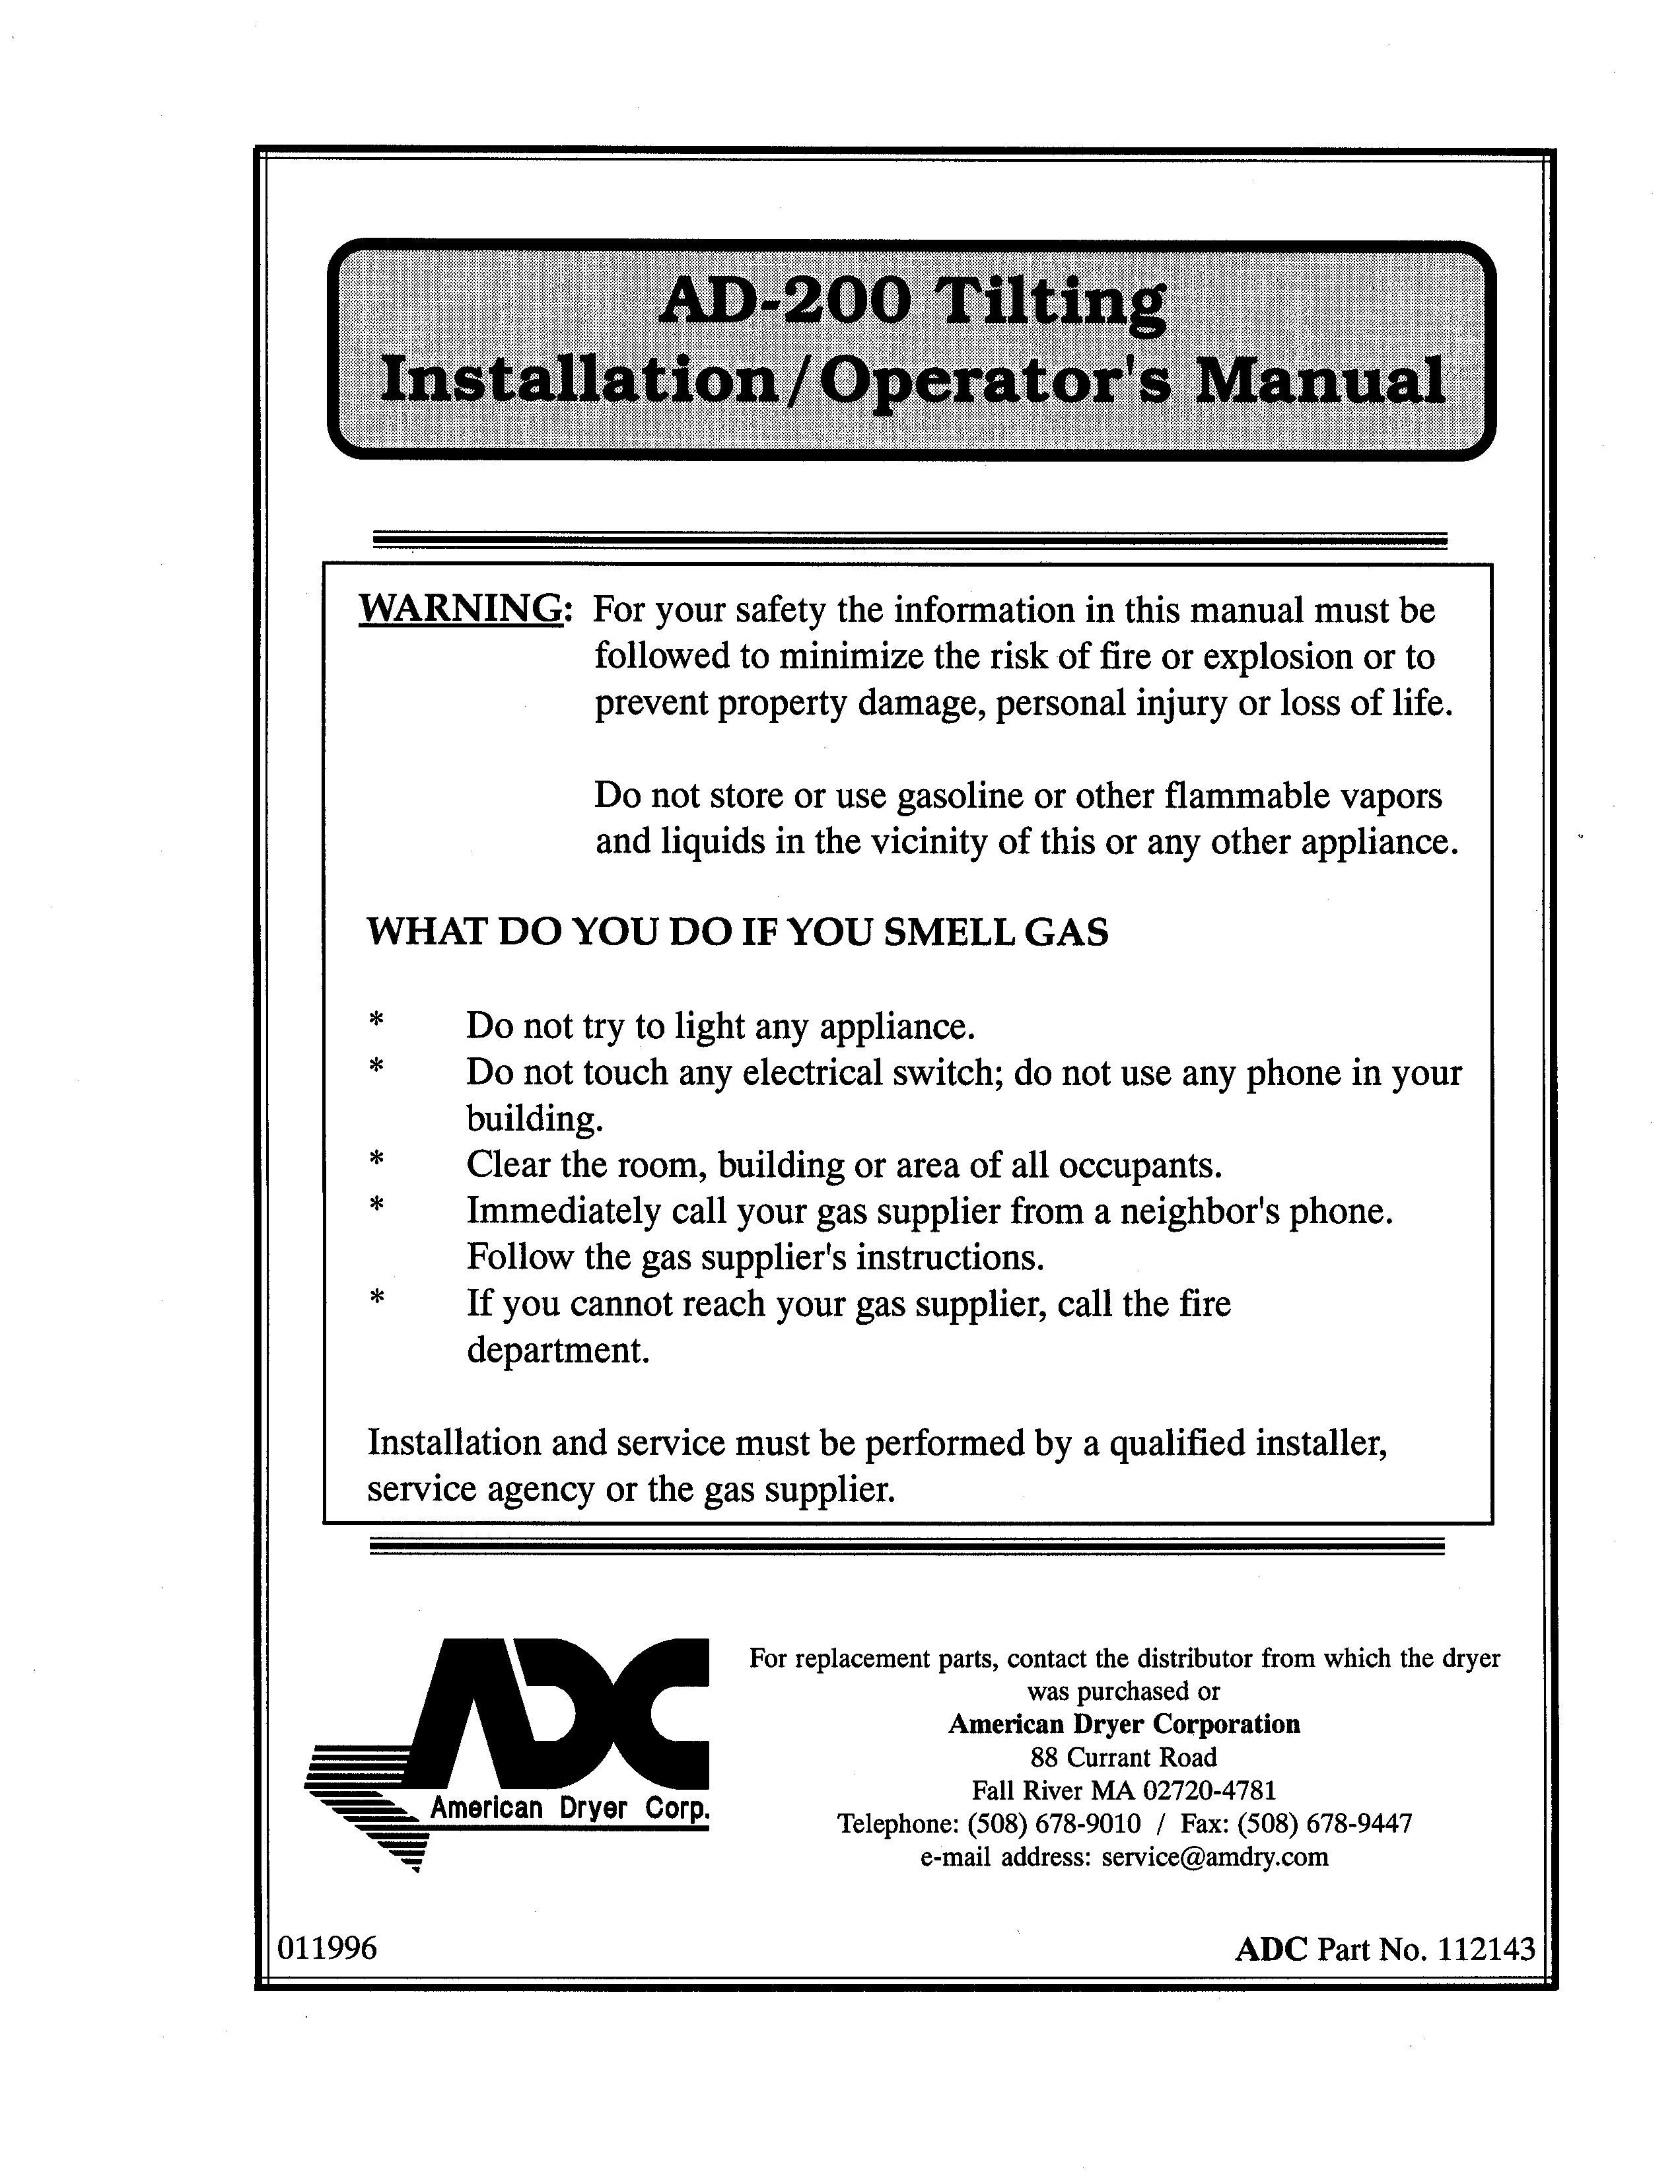 American Dryer Corp. AD-200 Tilting Clothes Dryer User Manual